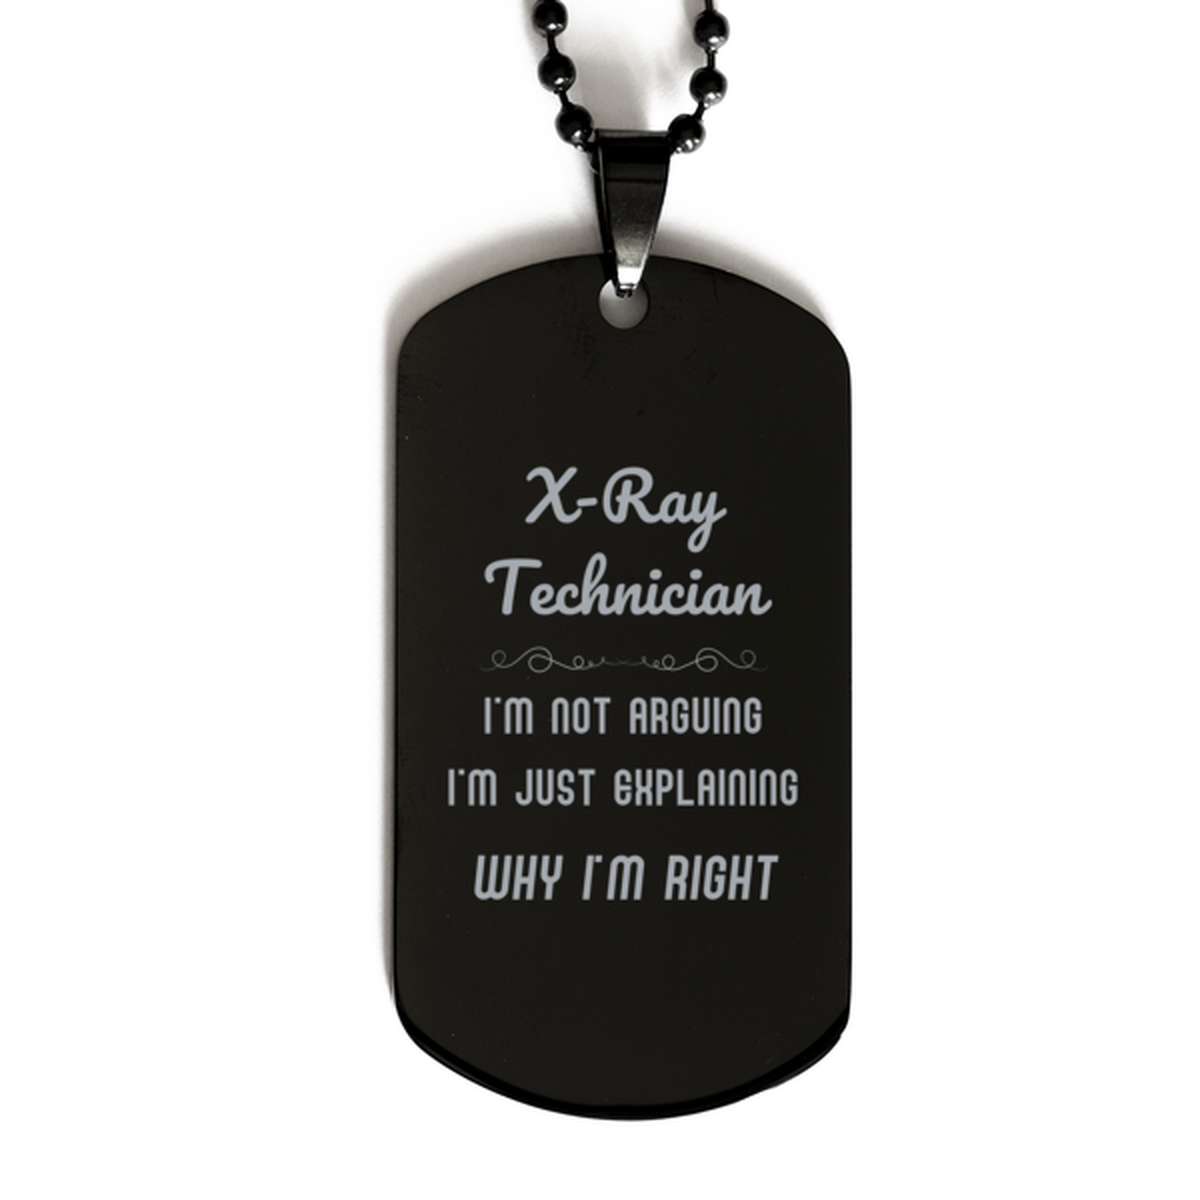 X-Ray Technician I'm not Arguing. I'm Just Explaining Why I'm RIGHT Black Dog Tag, Funny Saying Quote X-Ray Technician Gifts For X-Ray Technician Graduation Birthday Christmas Gifts for Men Women Coworker